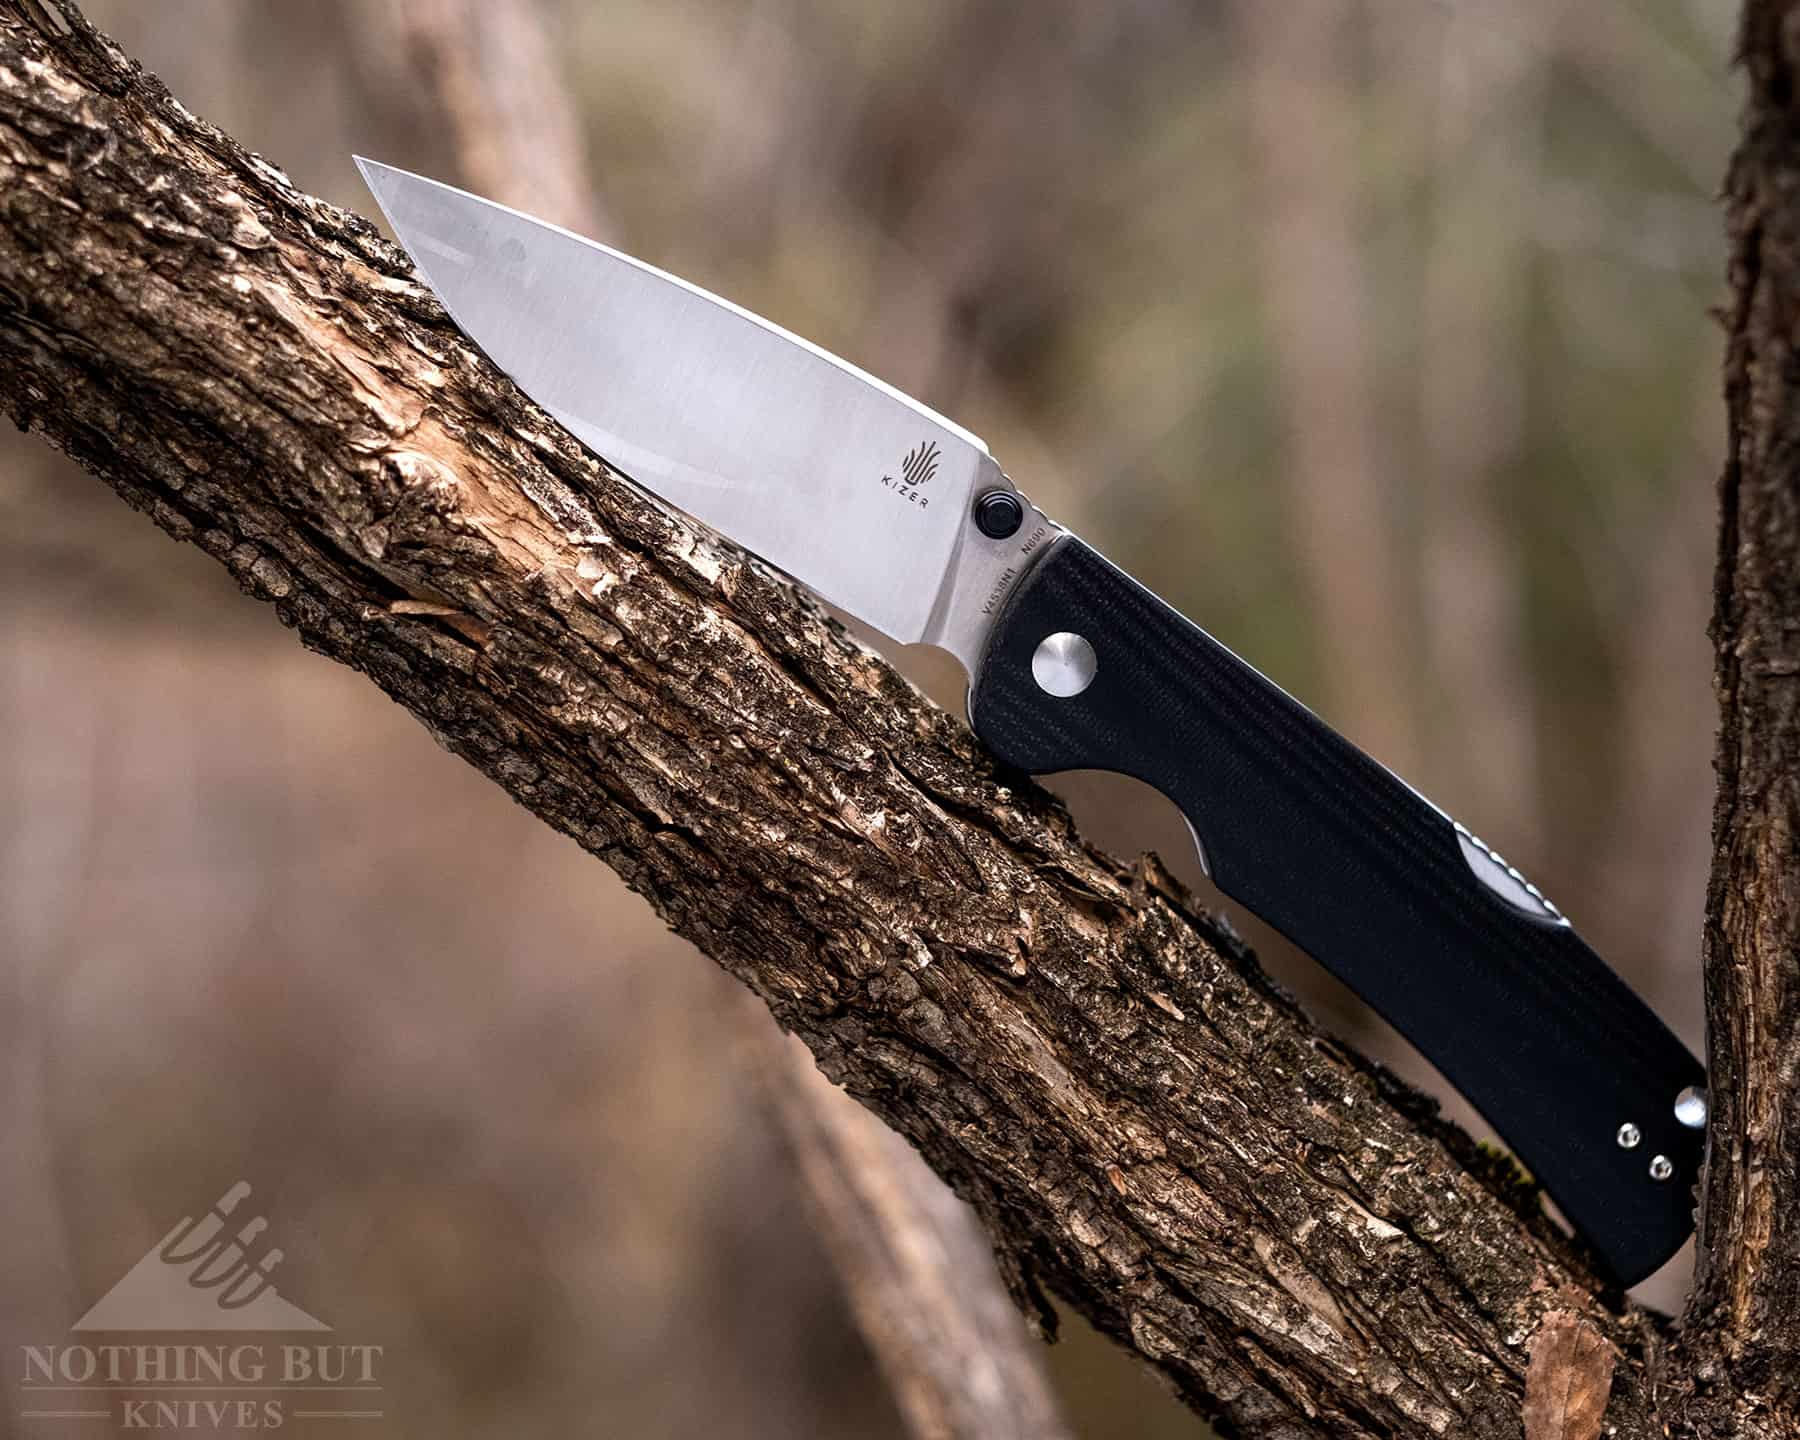 A close-up of the Kizer Slicer that shows the smudges on the satin finished blade